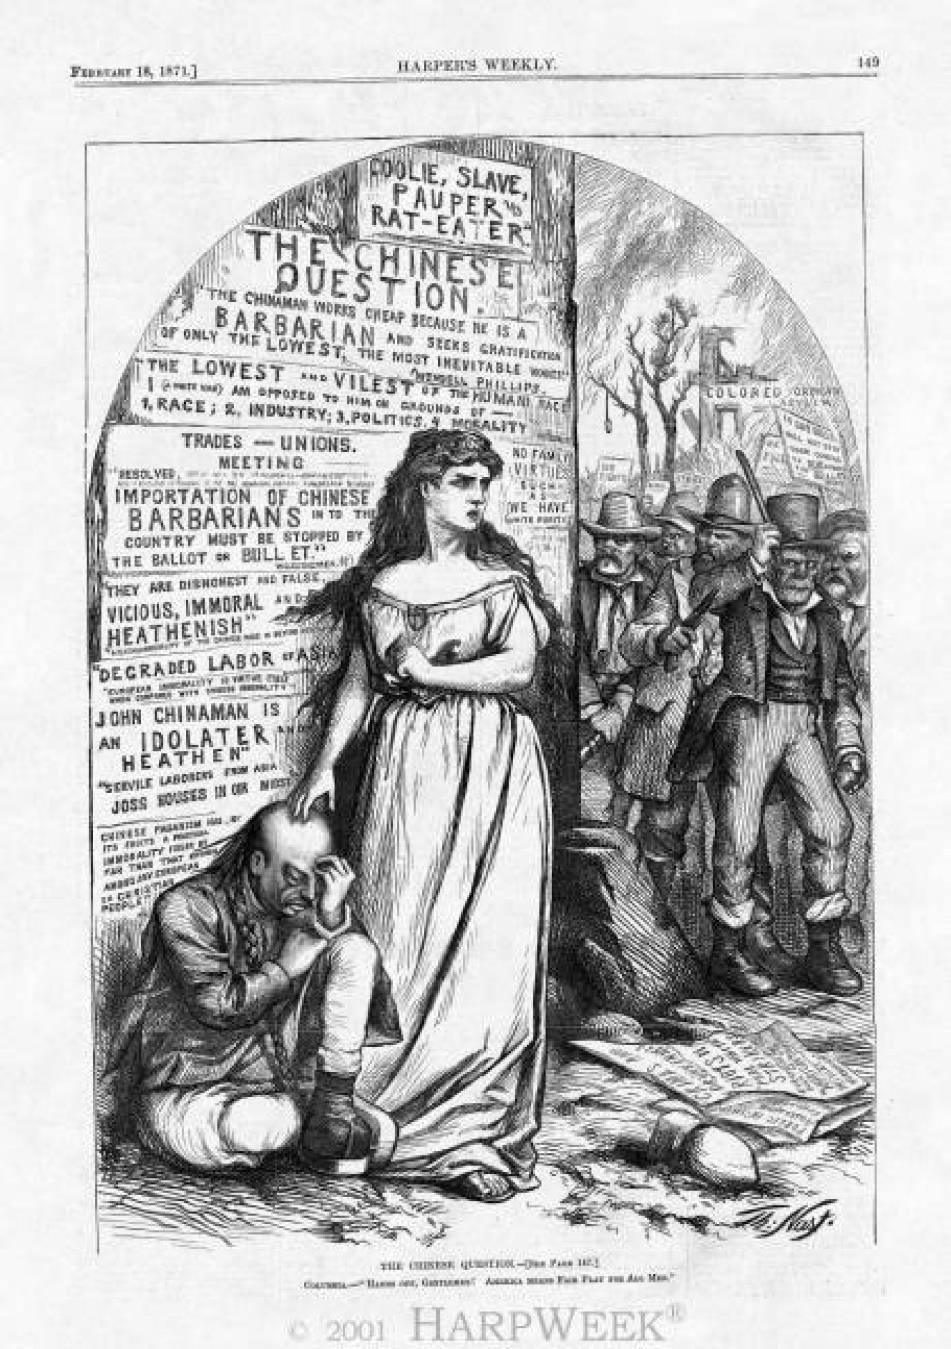 Document B: Political Cartoon, 1871 If this document were your ONLY piece of evidence, how would you answer the question: Why did Americans pass the 1882 Chinese Exclusion Act?